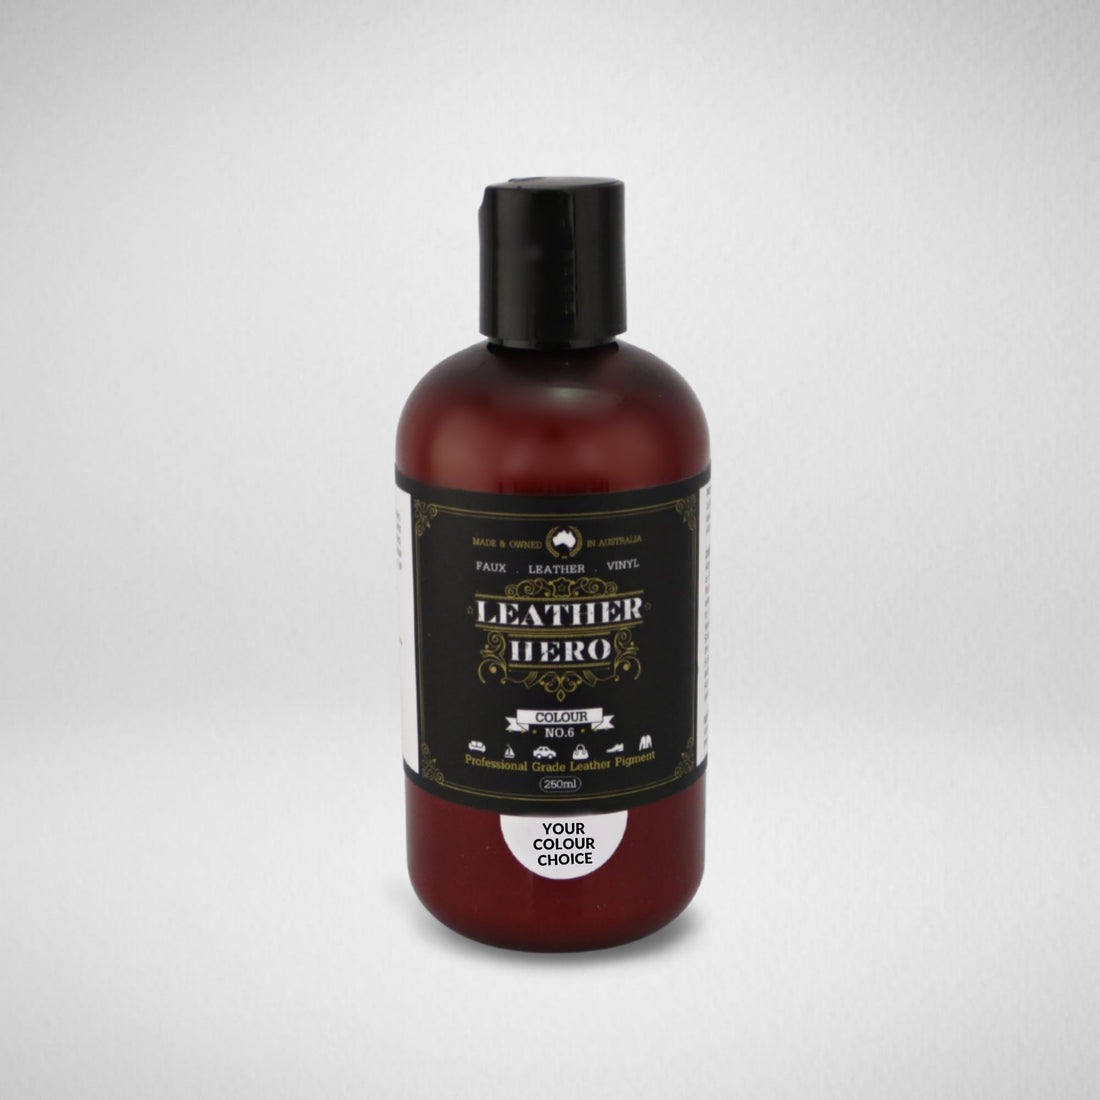 Leather Paint - Harbour Leather Repair & Recolouring Leather Hero Australia